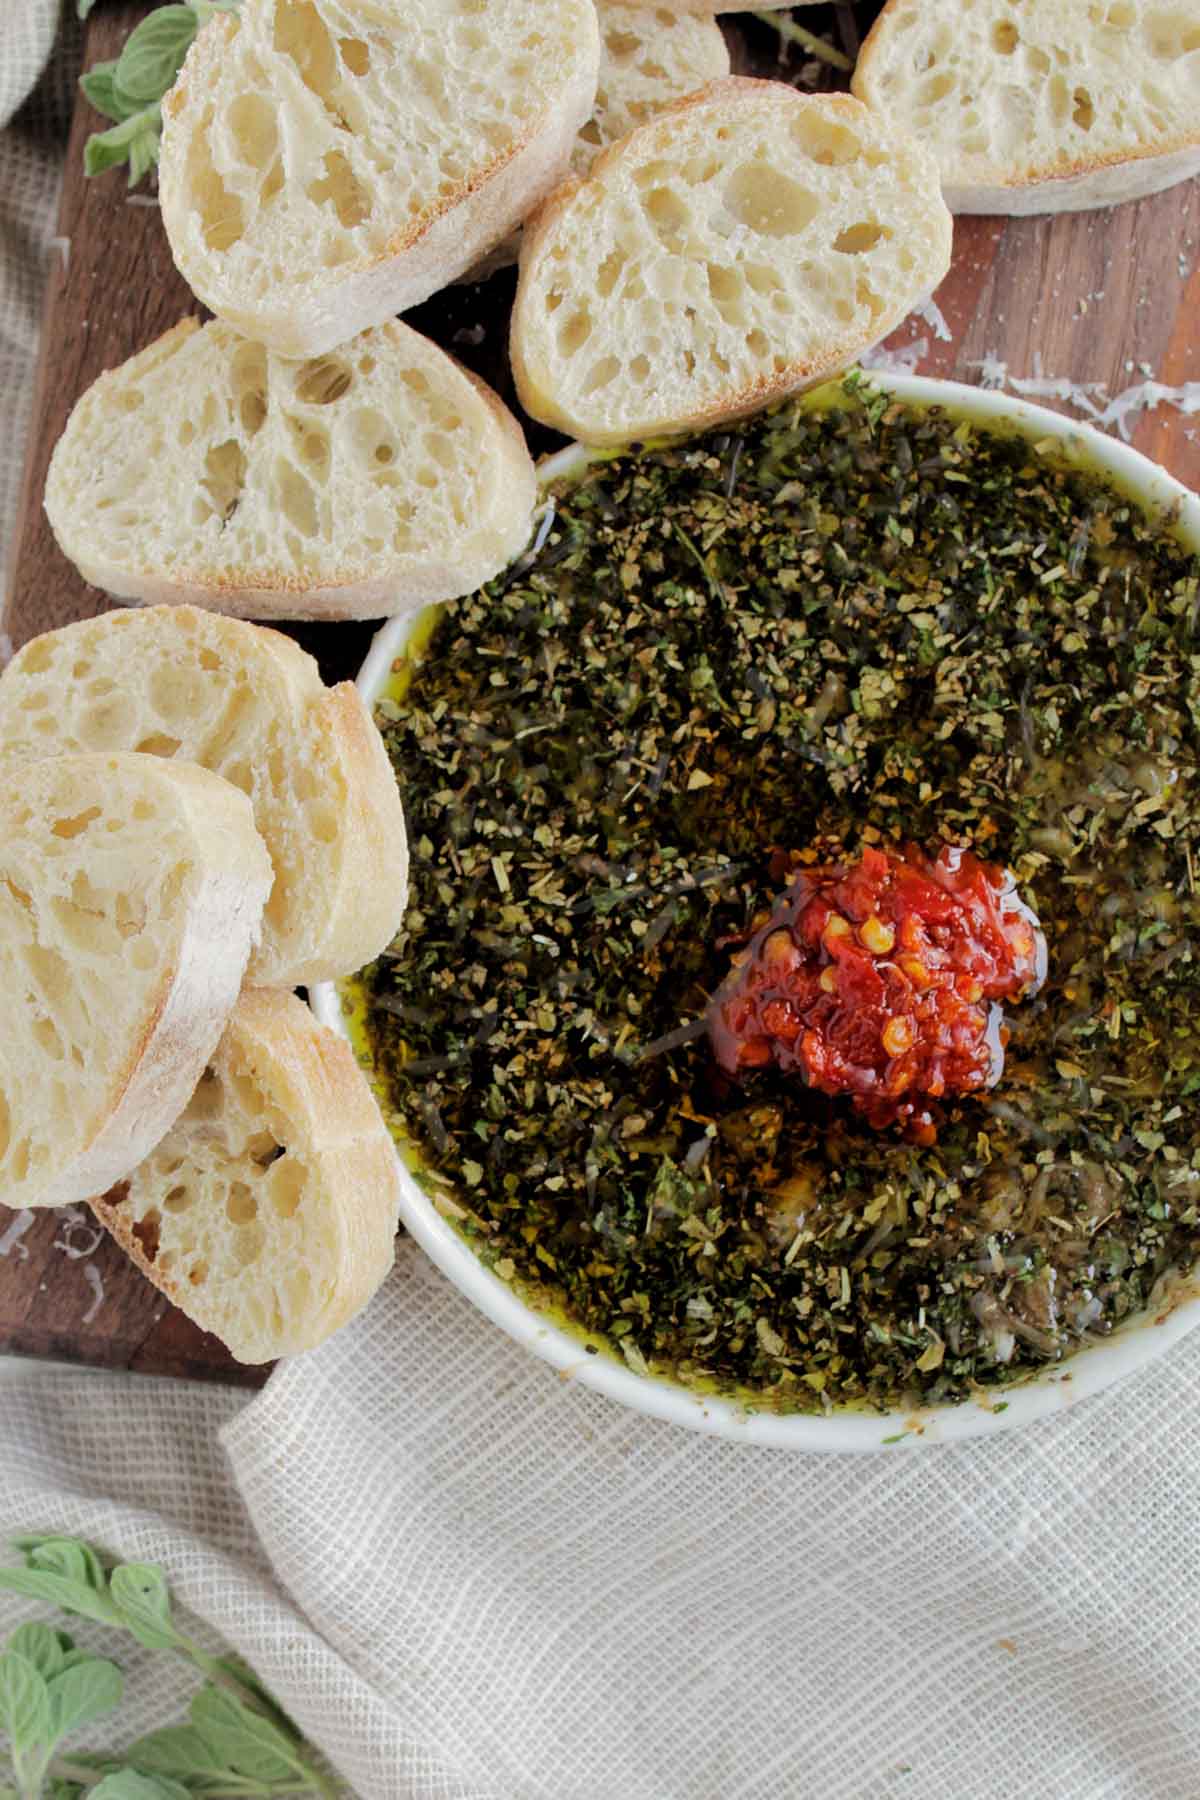 herbed olive oil dip with calabrian chili paste